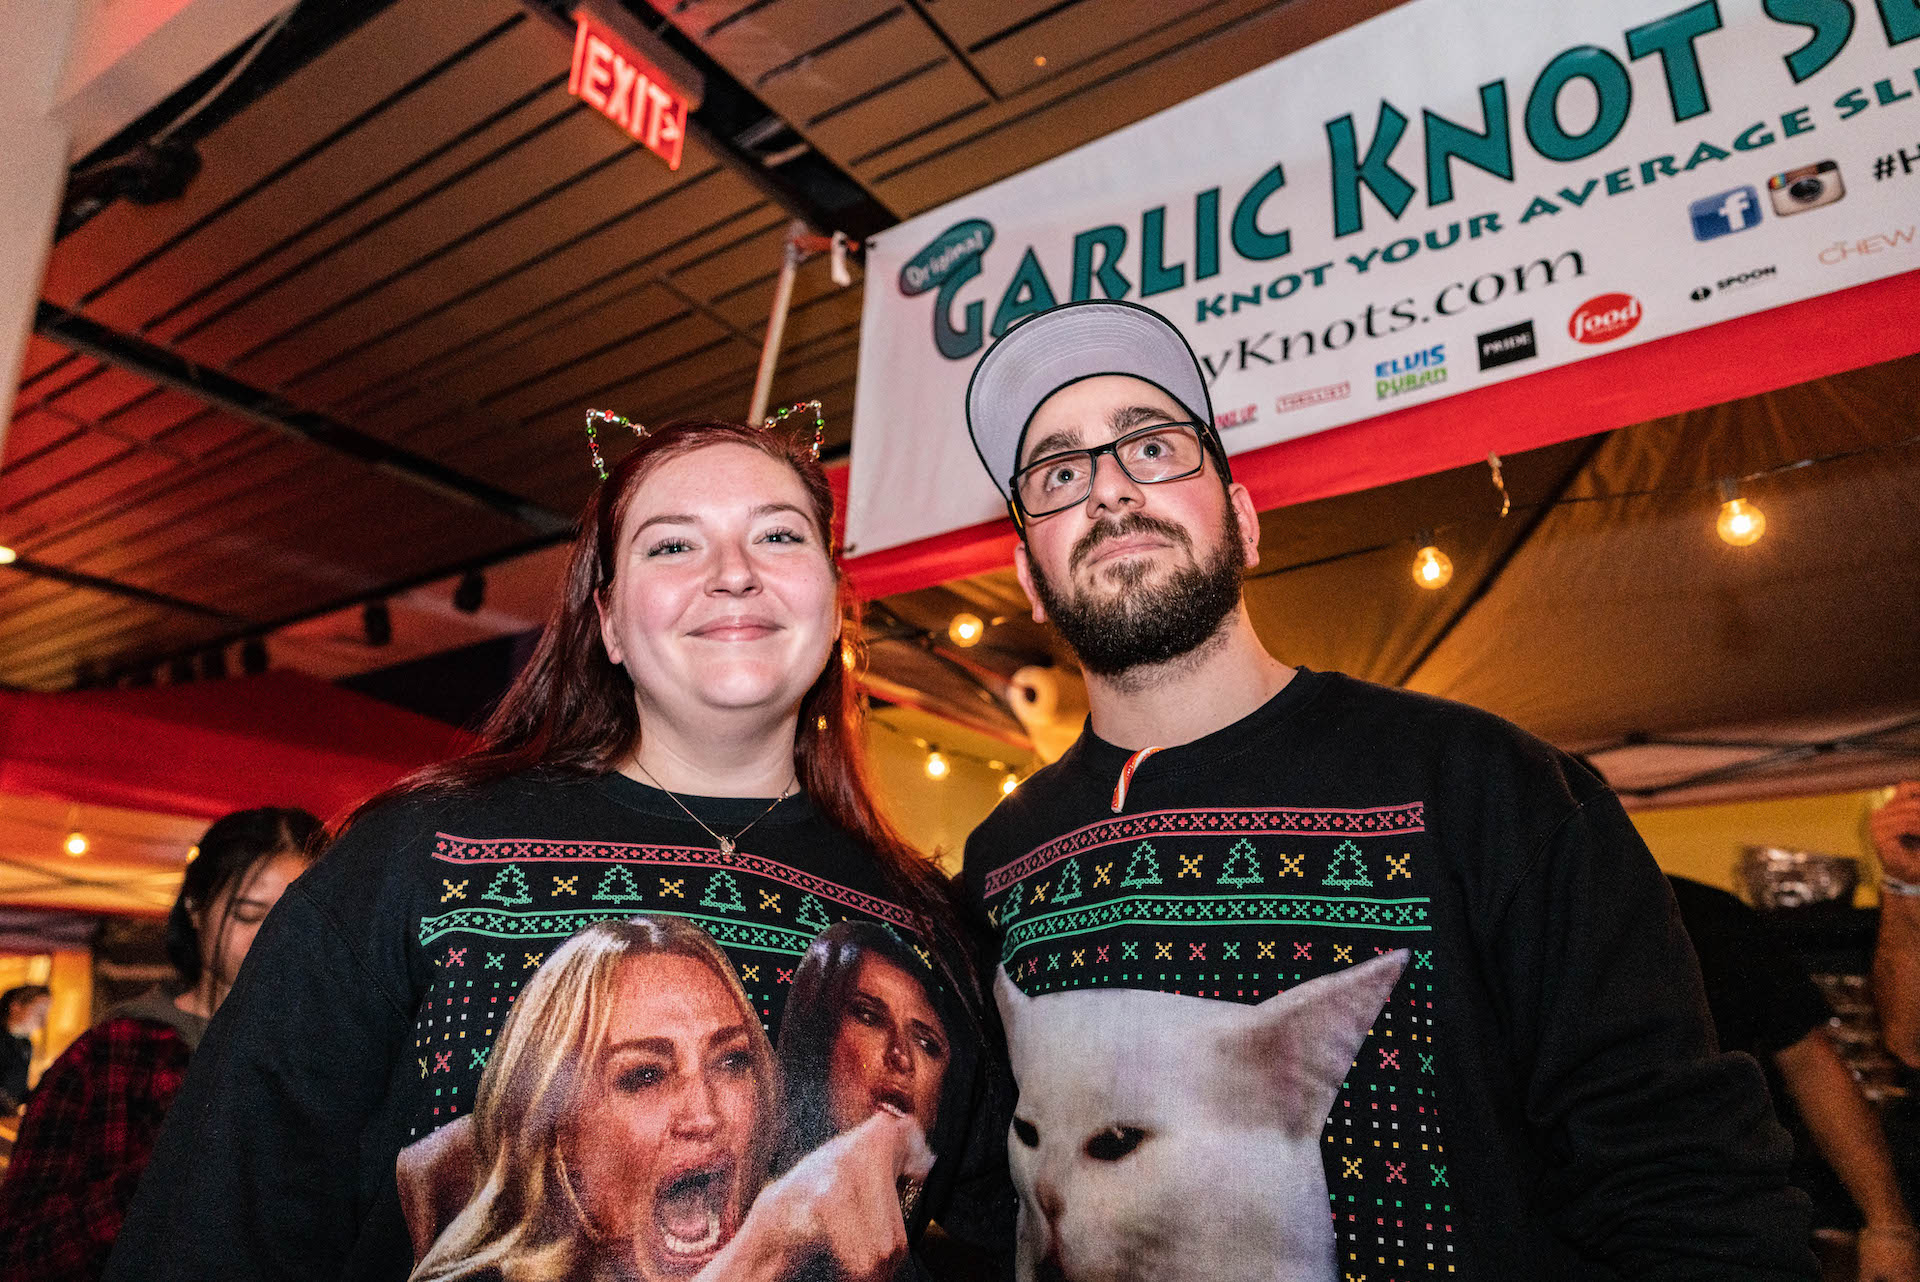 Guests wearing ugly sweaters at LSC After Dark: Candyland